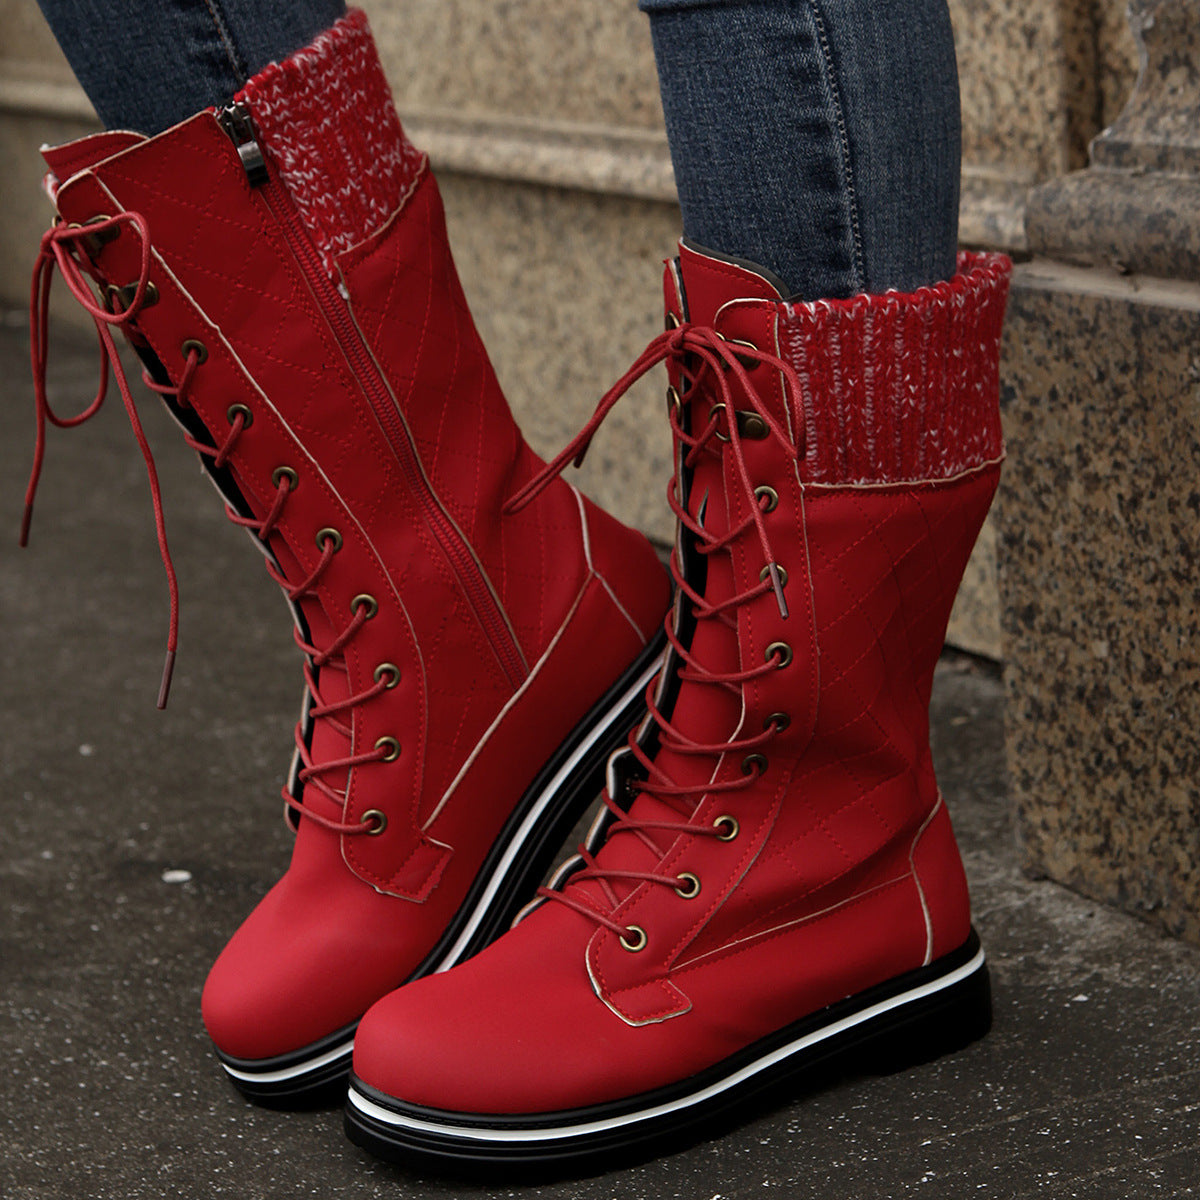 Brittany Be Mine Rider Boots